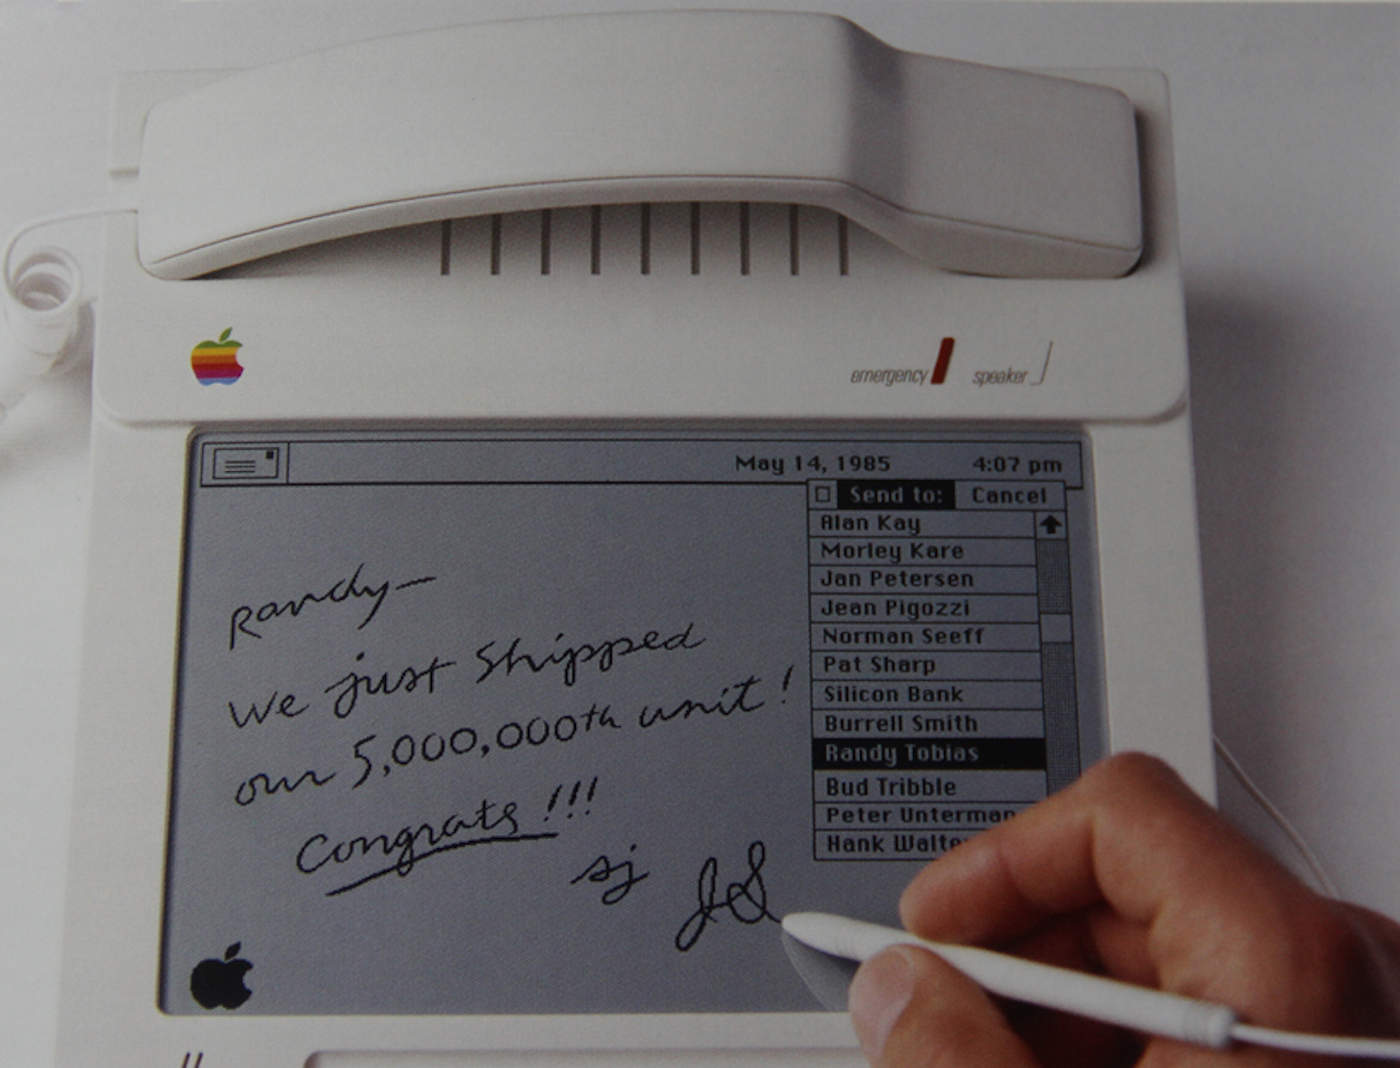 Let us remind you of the weird Apple products that time forgot.